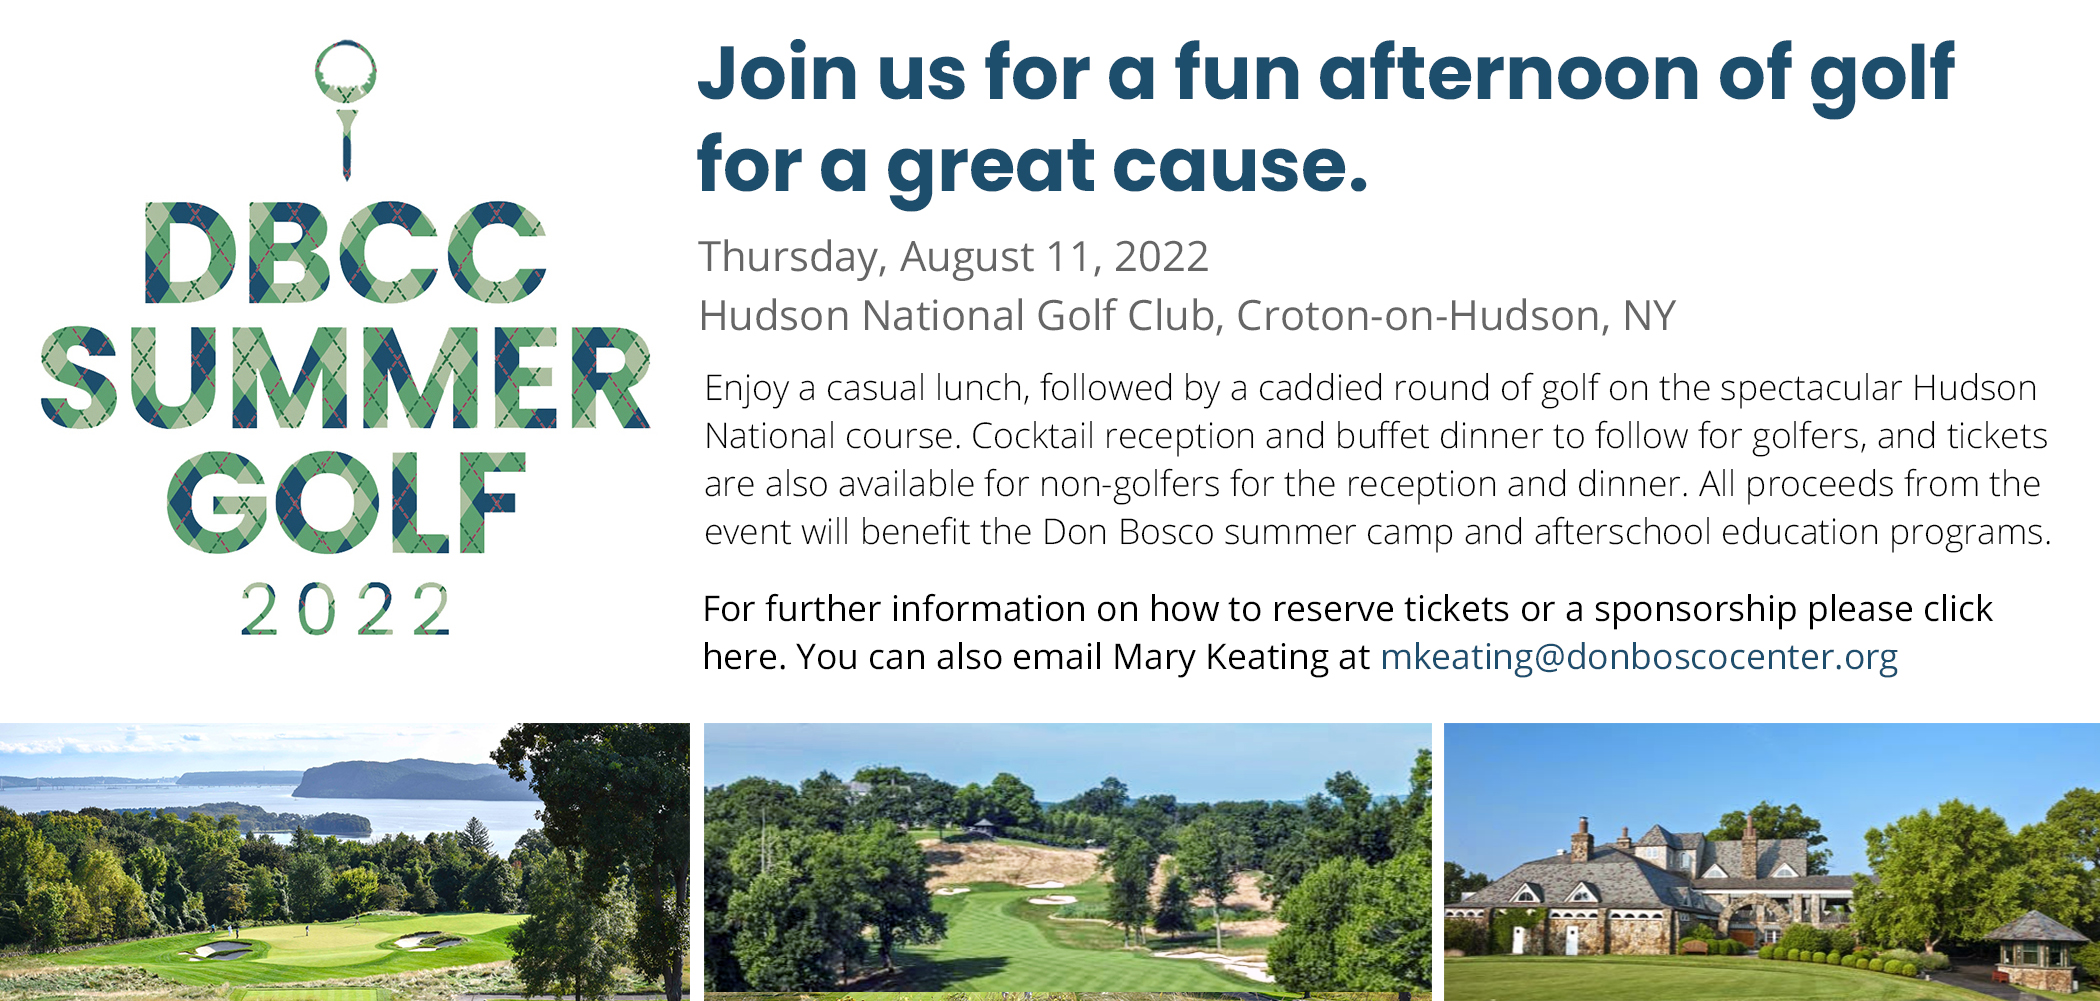 DBCC Summer Golf 2022 - Join Us!